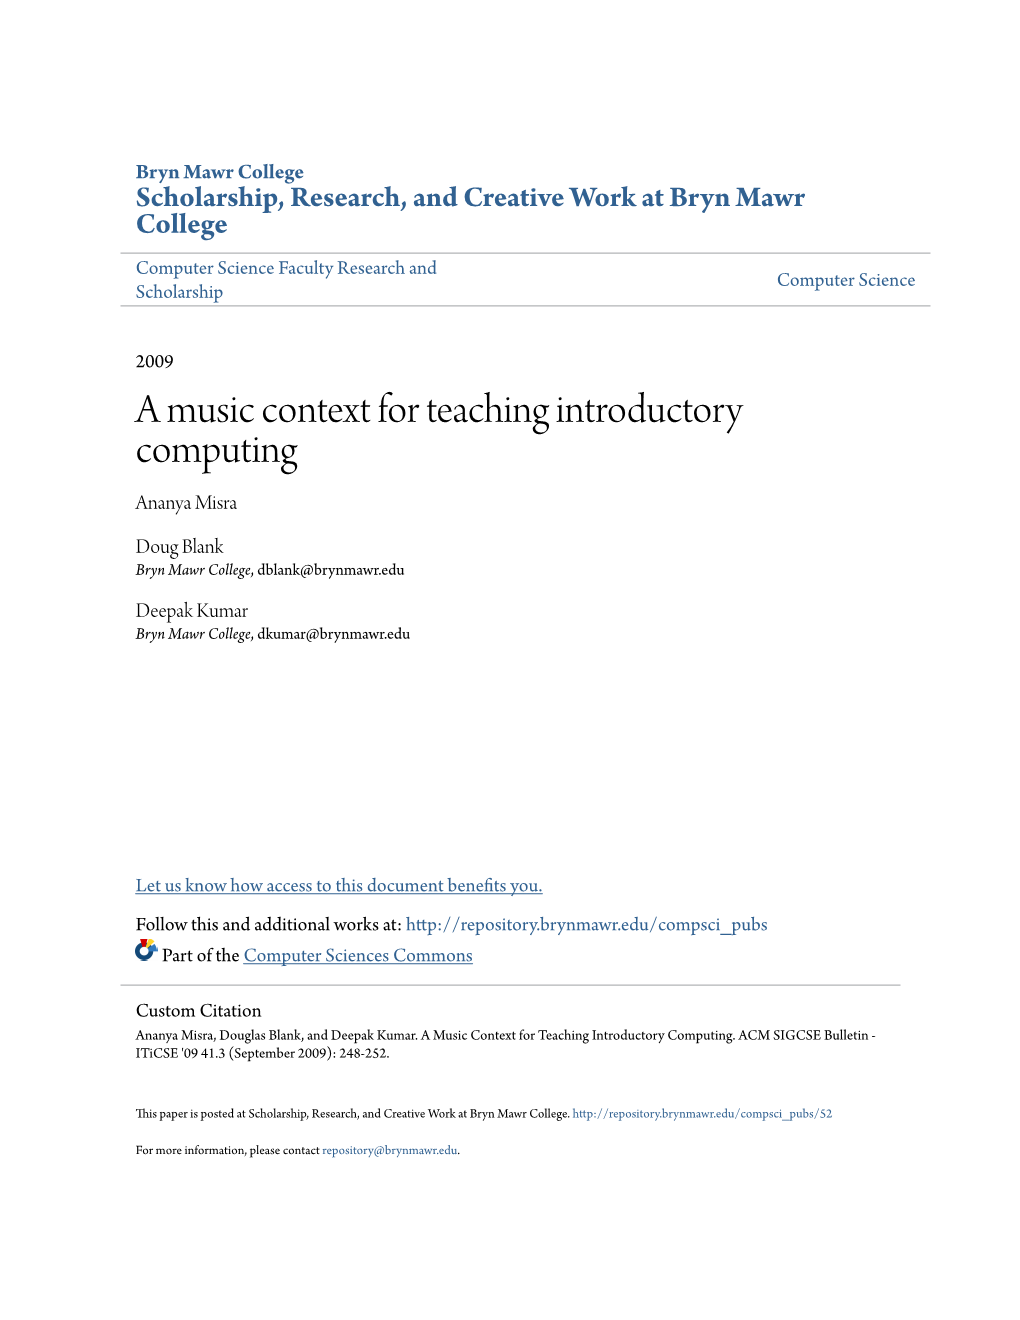 A Music Context for Teaching Introductory Computing Ananya Misra